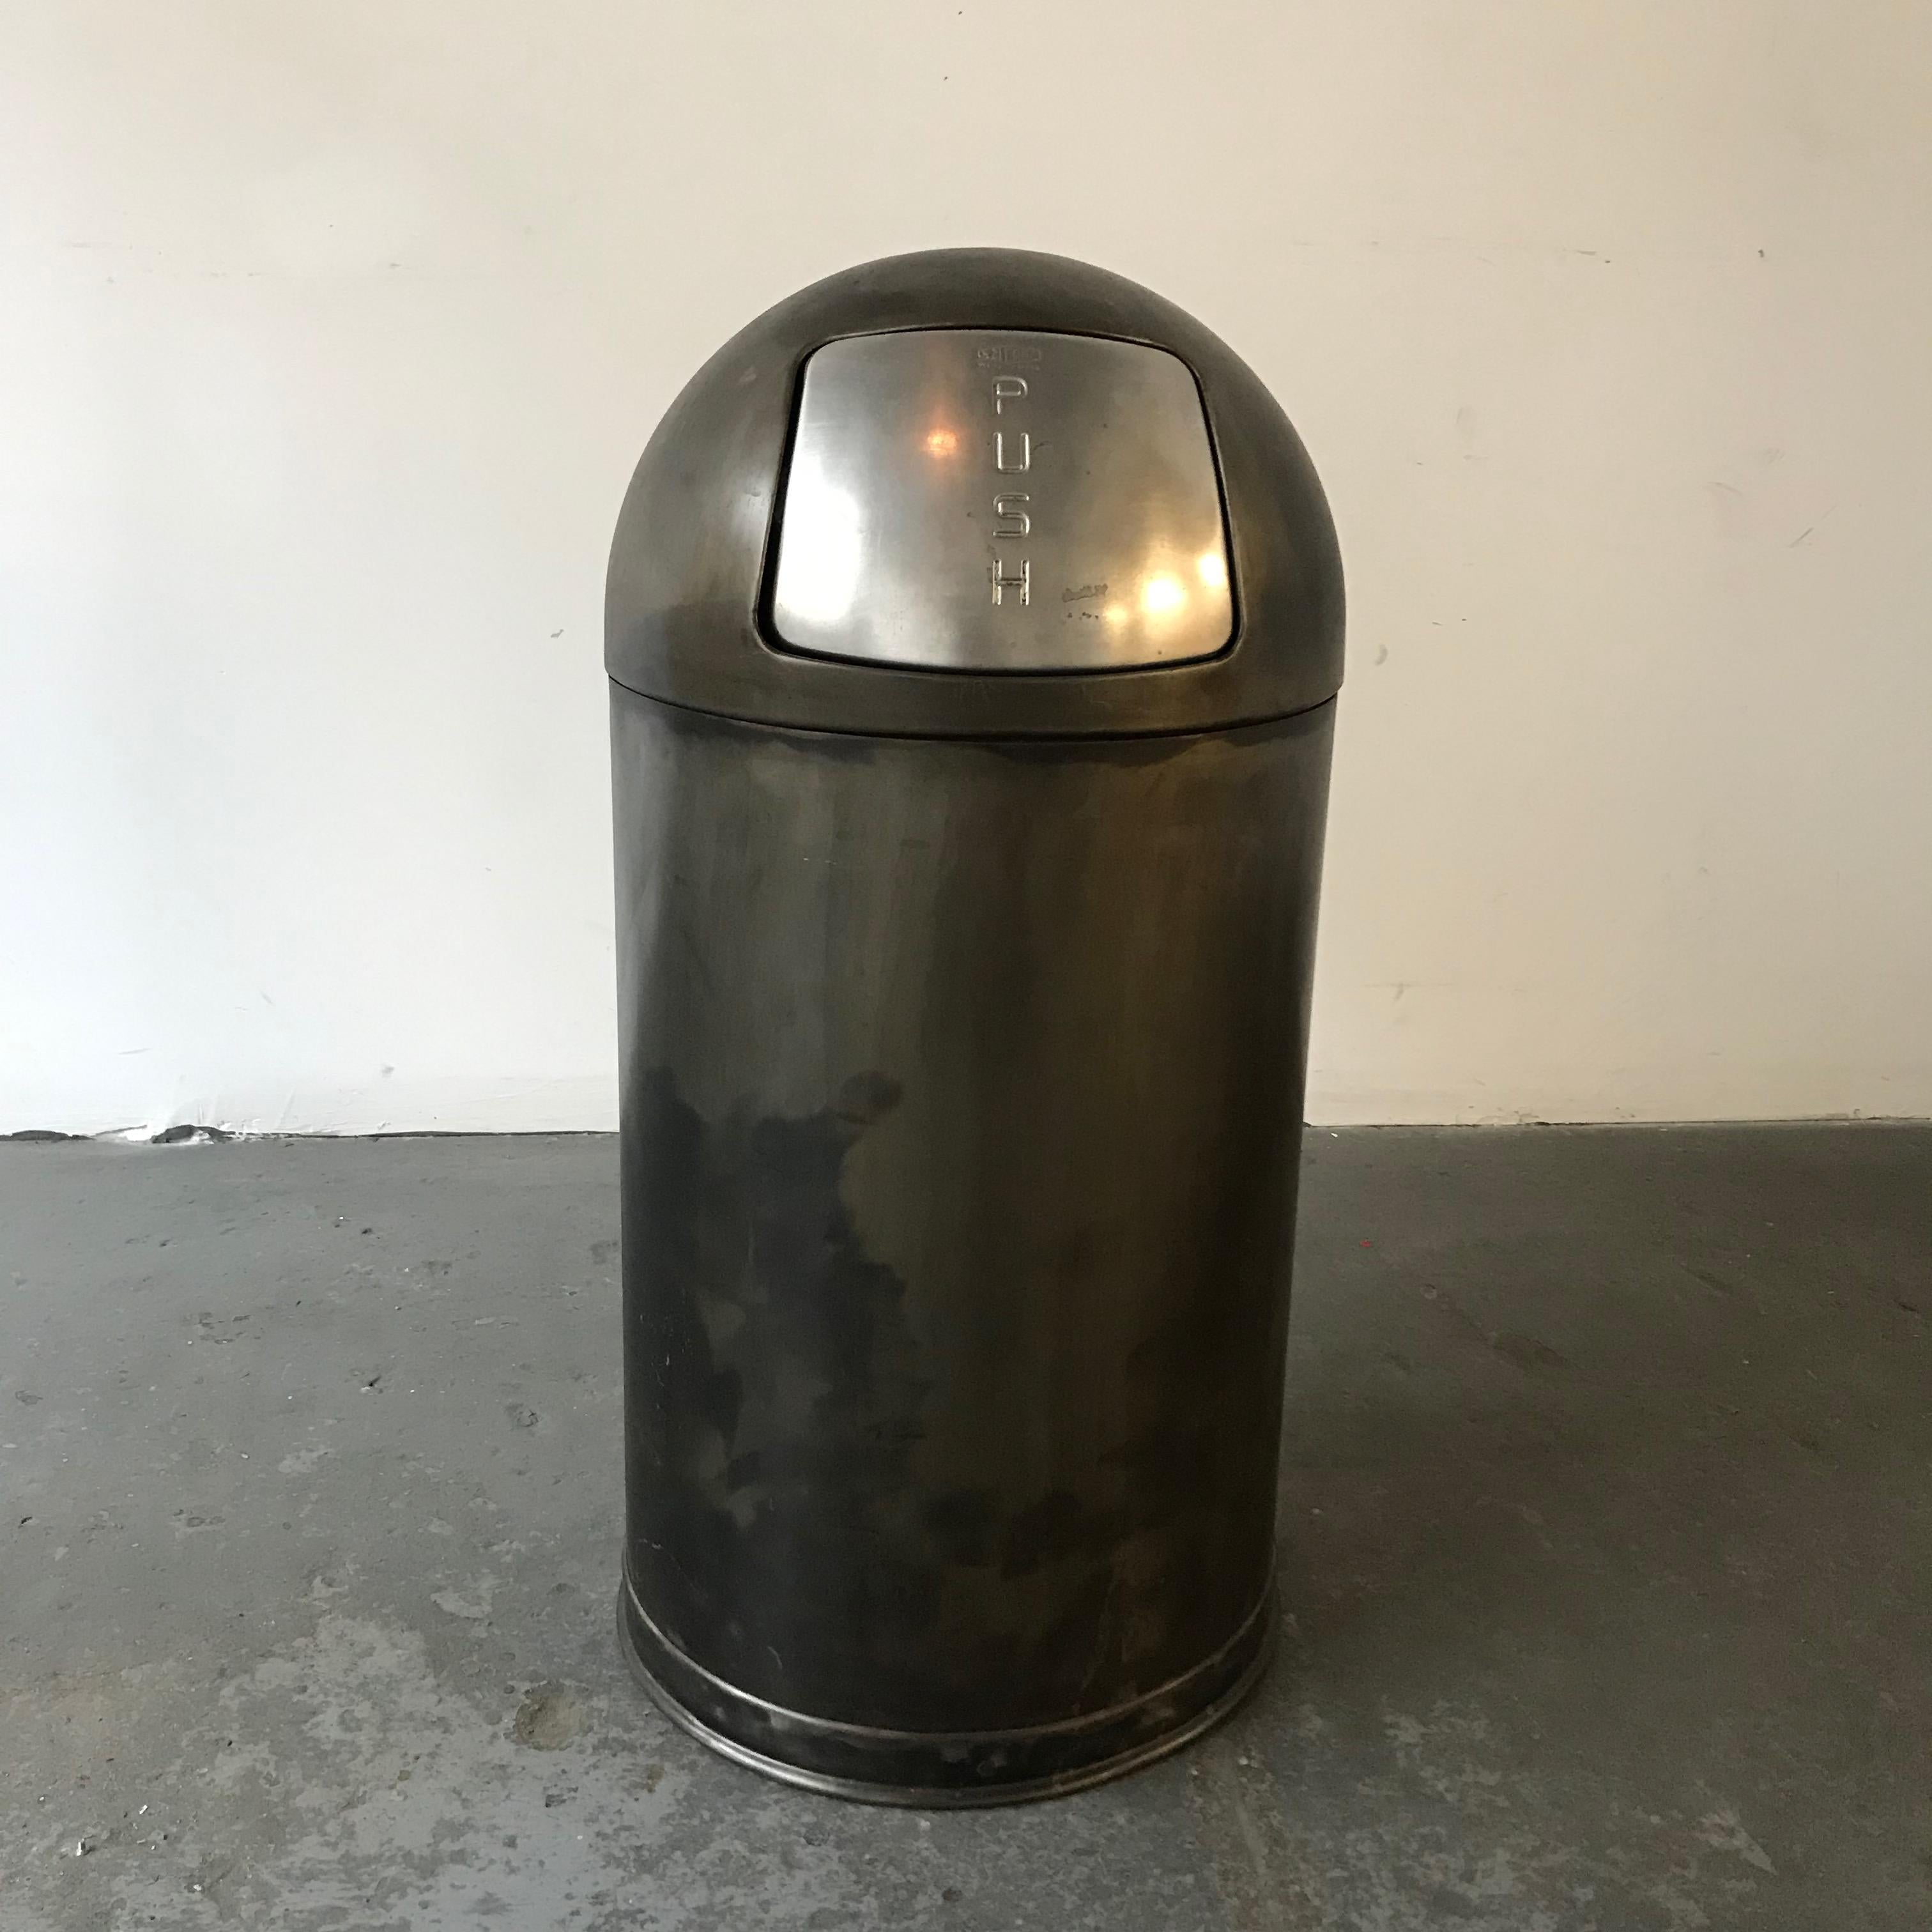 Industrial, midcentury, trash can features a gunmetal steel finish, bullet shaped exterior with push top that fits over a galvanized steel trash receptacle.